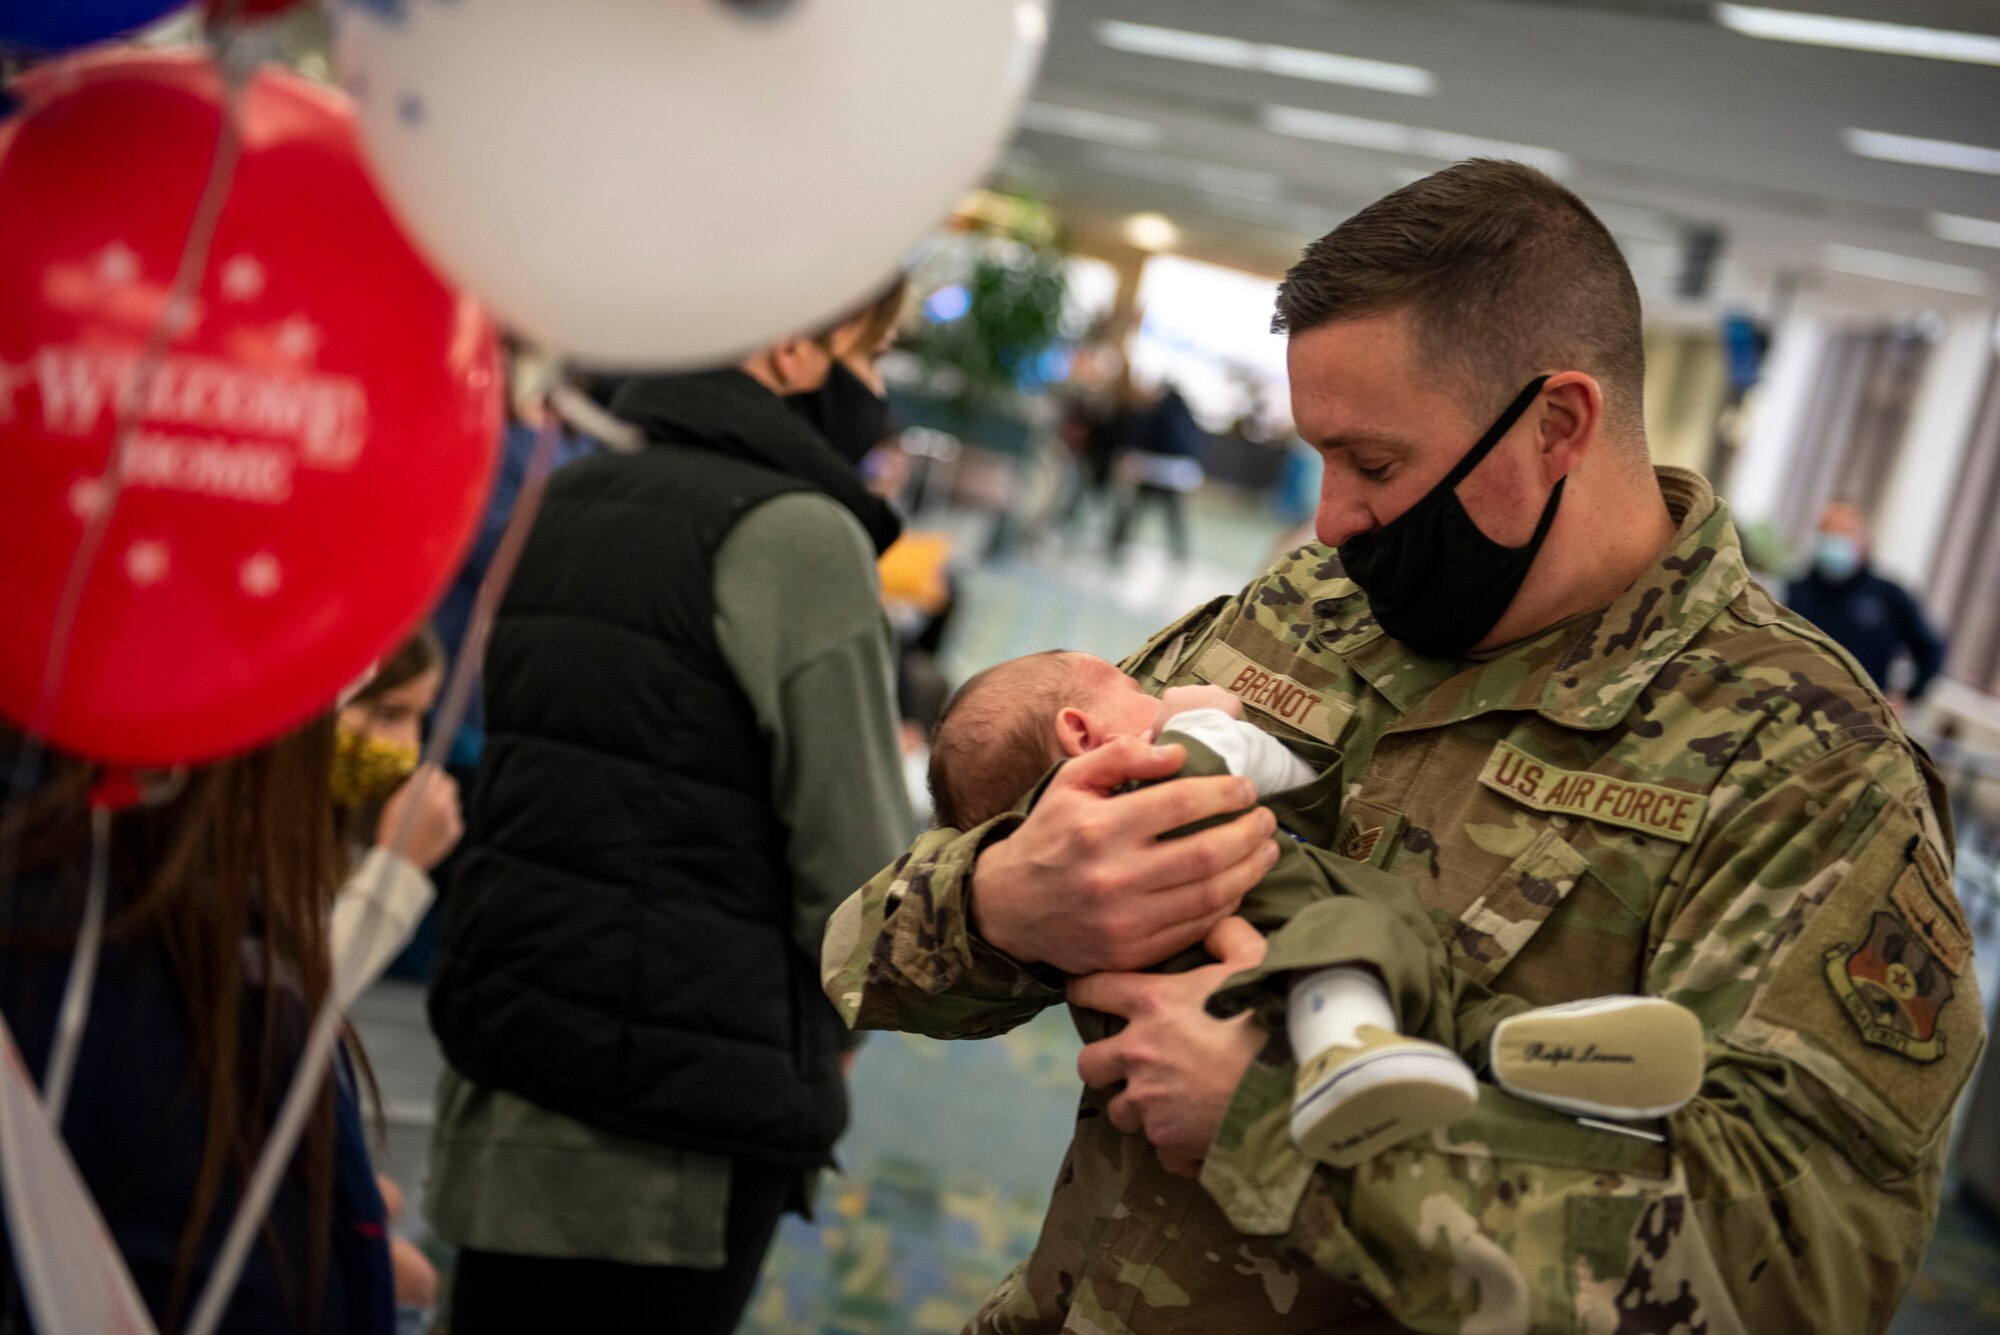 A U.S. Airman, assigned to the Ohio National Guard’s 180th Fighter Wing, holds his child for the first time after returning home from an overseas deployment, Dec. 31, 2020 at the Eugene F. Kranz Toledo Express Airport.